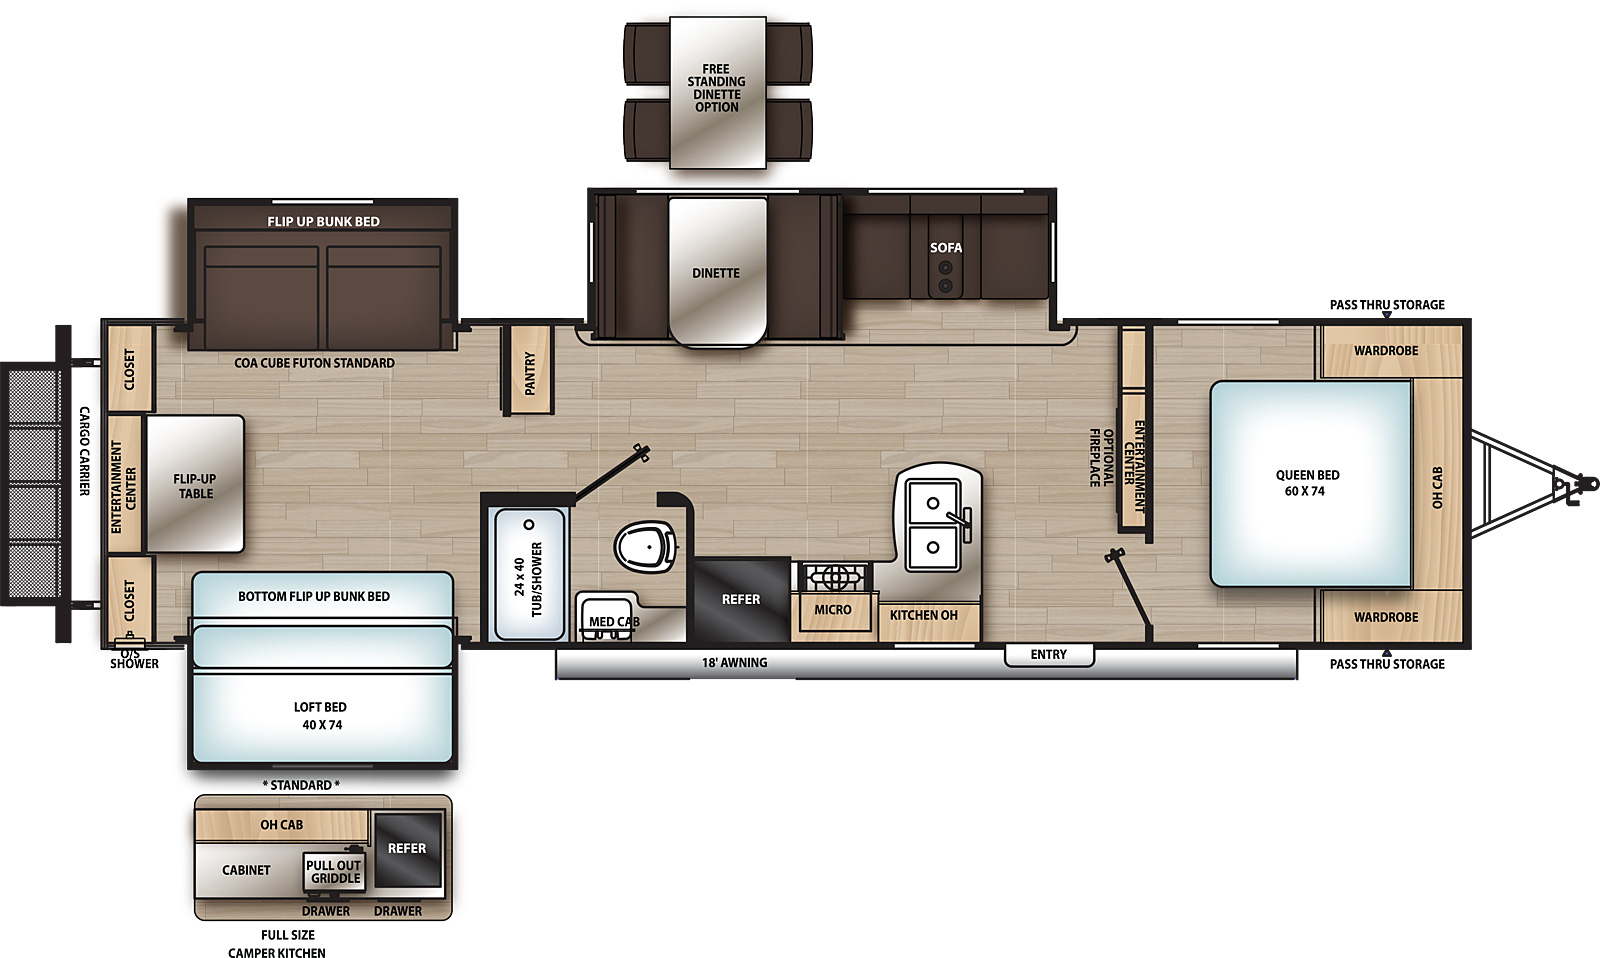 The 323QBTSCK has three slide outs, two on the off-door side and one on the door side, and one entry door towards the front. Interior layout from front to back: front bedroom with foot facing queen bed, overhead cabinet, and wardrobes on either side of the bed; entry door opens to living area with entertainment center and optional fireplace; off-door side pantry and slide out containing sofa and dinette; door side kitchen containing peninsula double basin sink, overhead cabinet, cook top stove, microwave cabinet, and refrigerator; door side bathroom; and rear bunk room with off-door side slide out containing COA Cube futon with upper flip up bunk bed, door side bottom flip up bunk bed with upper loft bed, and rear closets with entertainment center and flip up table. 